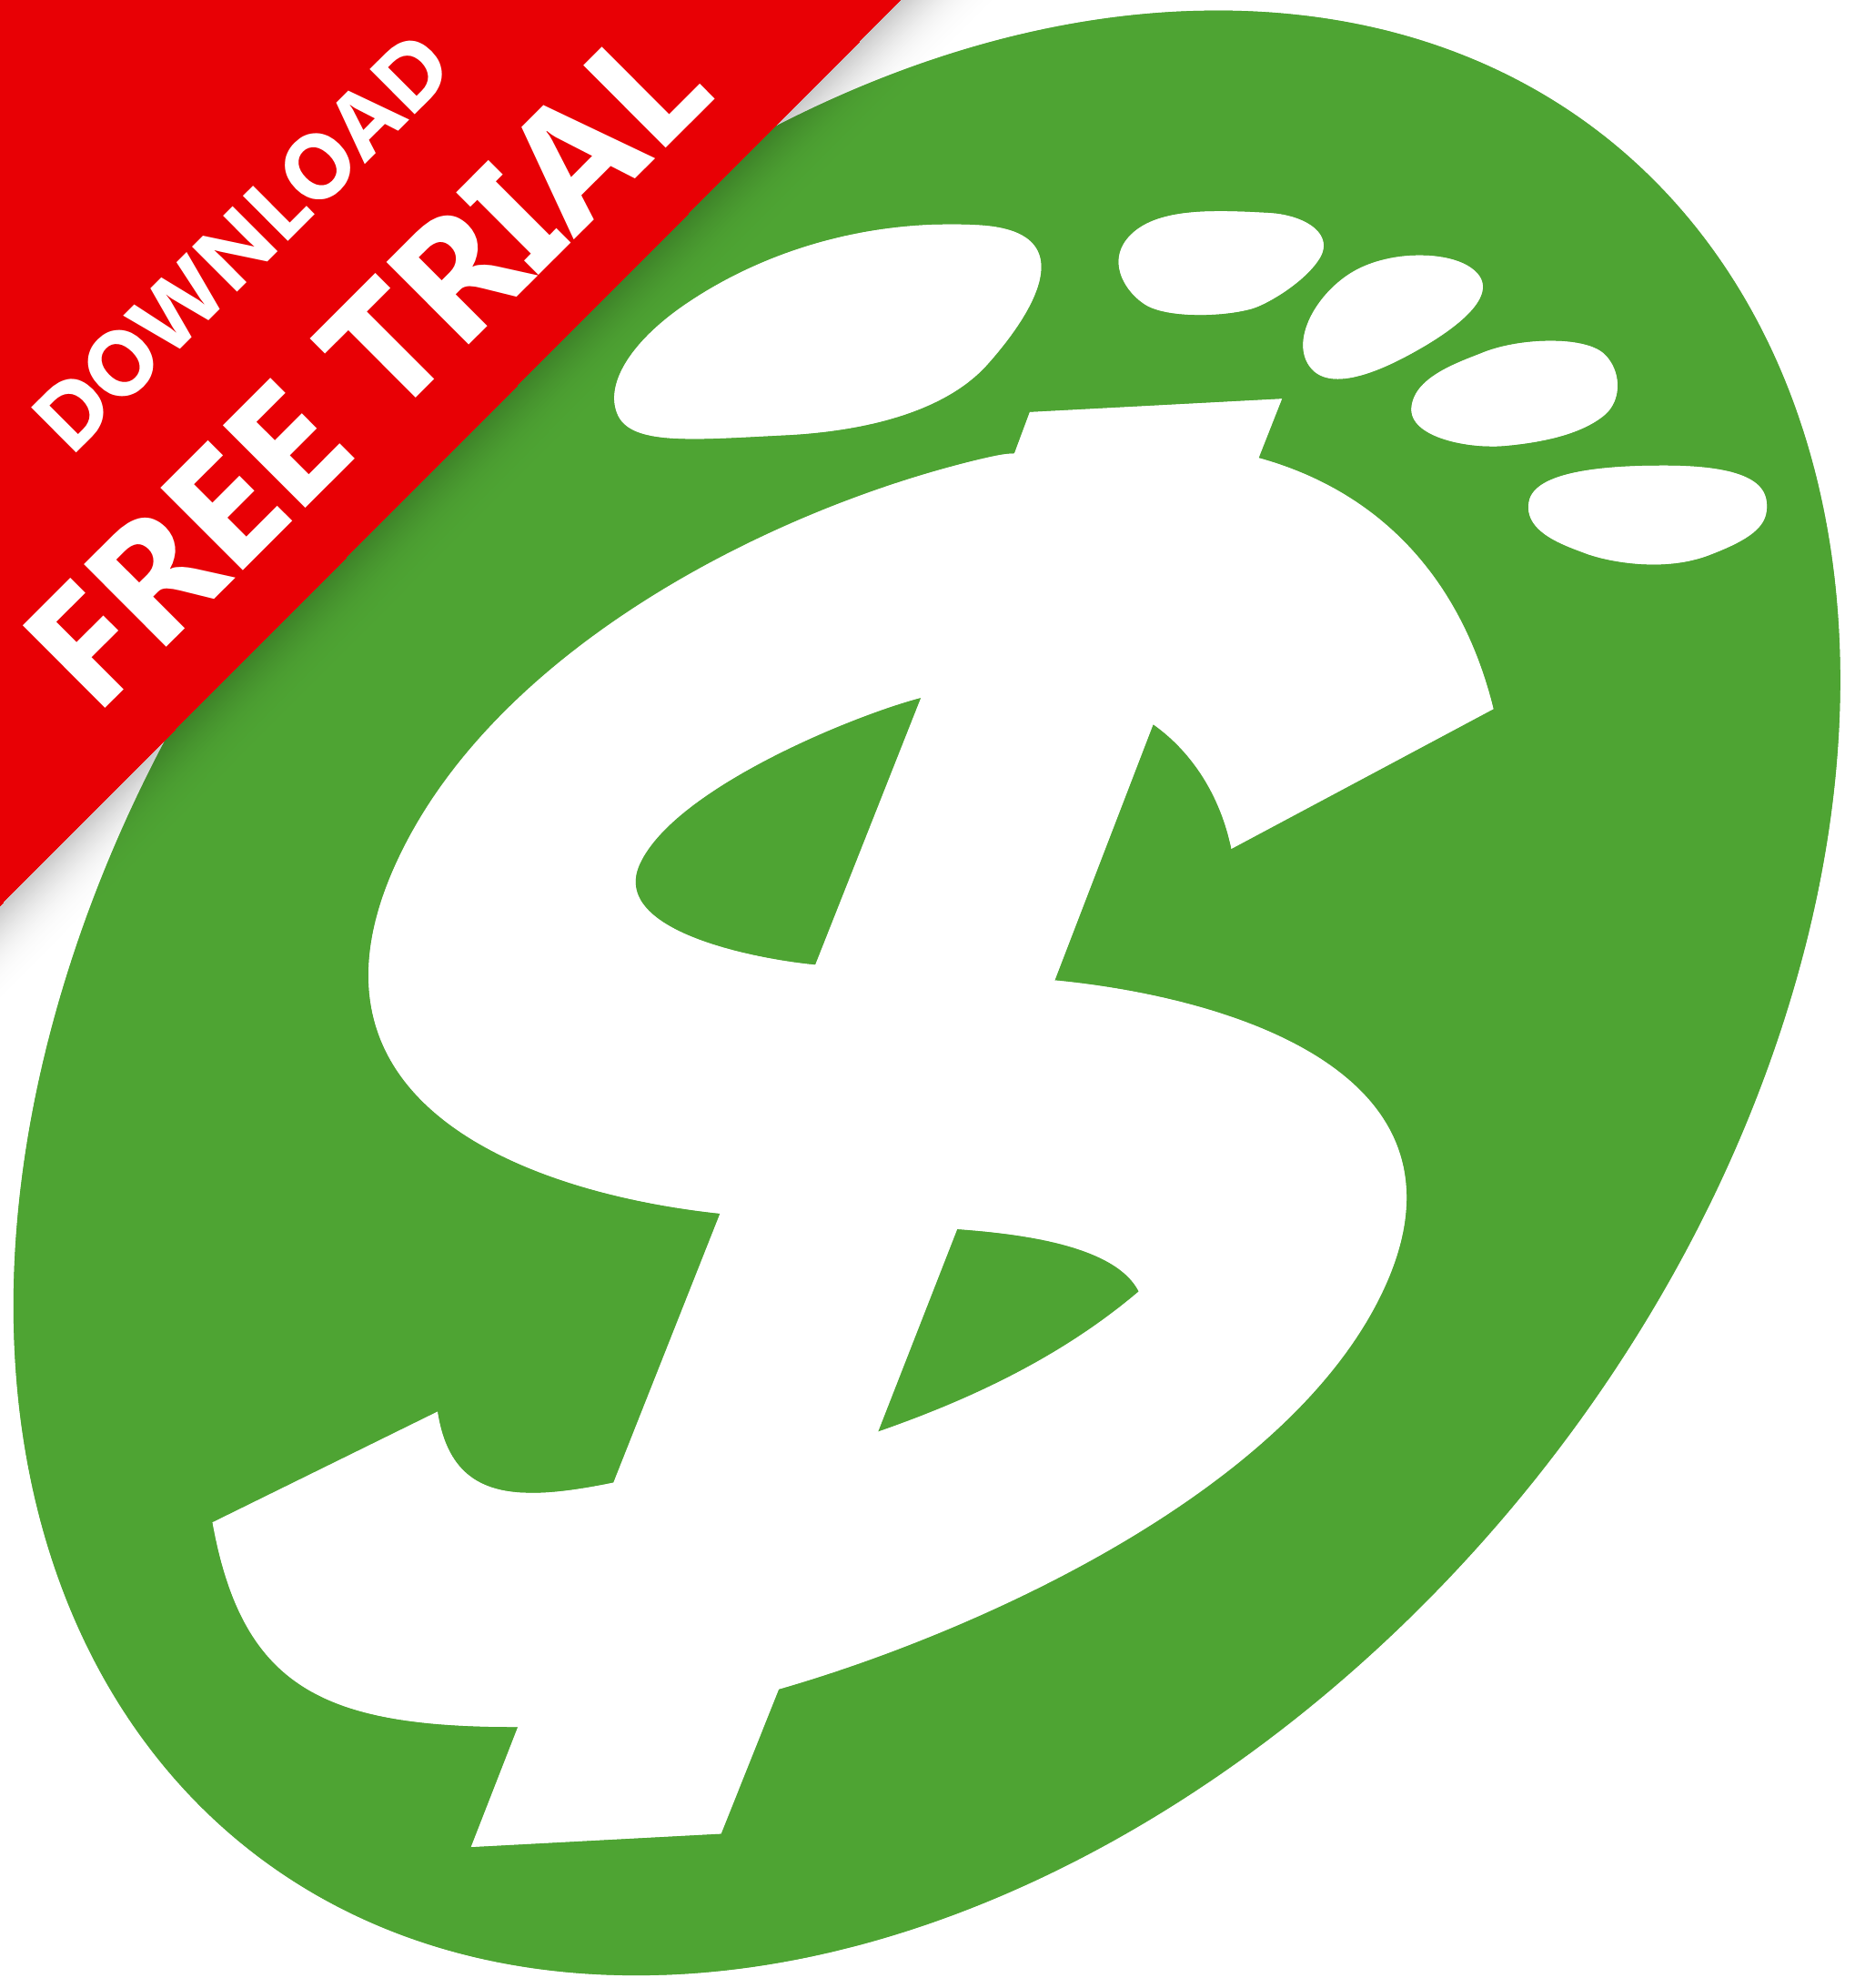 CashFootprint Professional - Desktop Point-of-Sale Software for your Windows Desktop, No Monthly Fee, Not Cloud Based